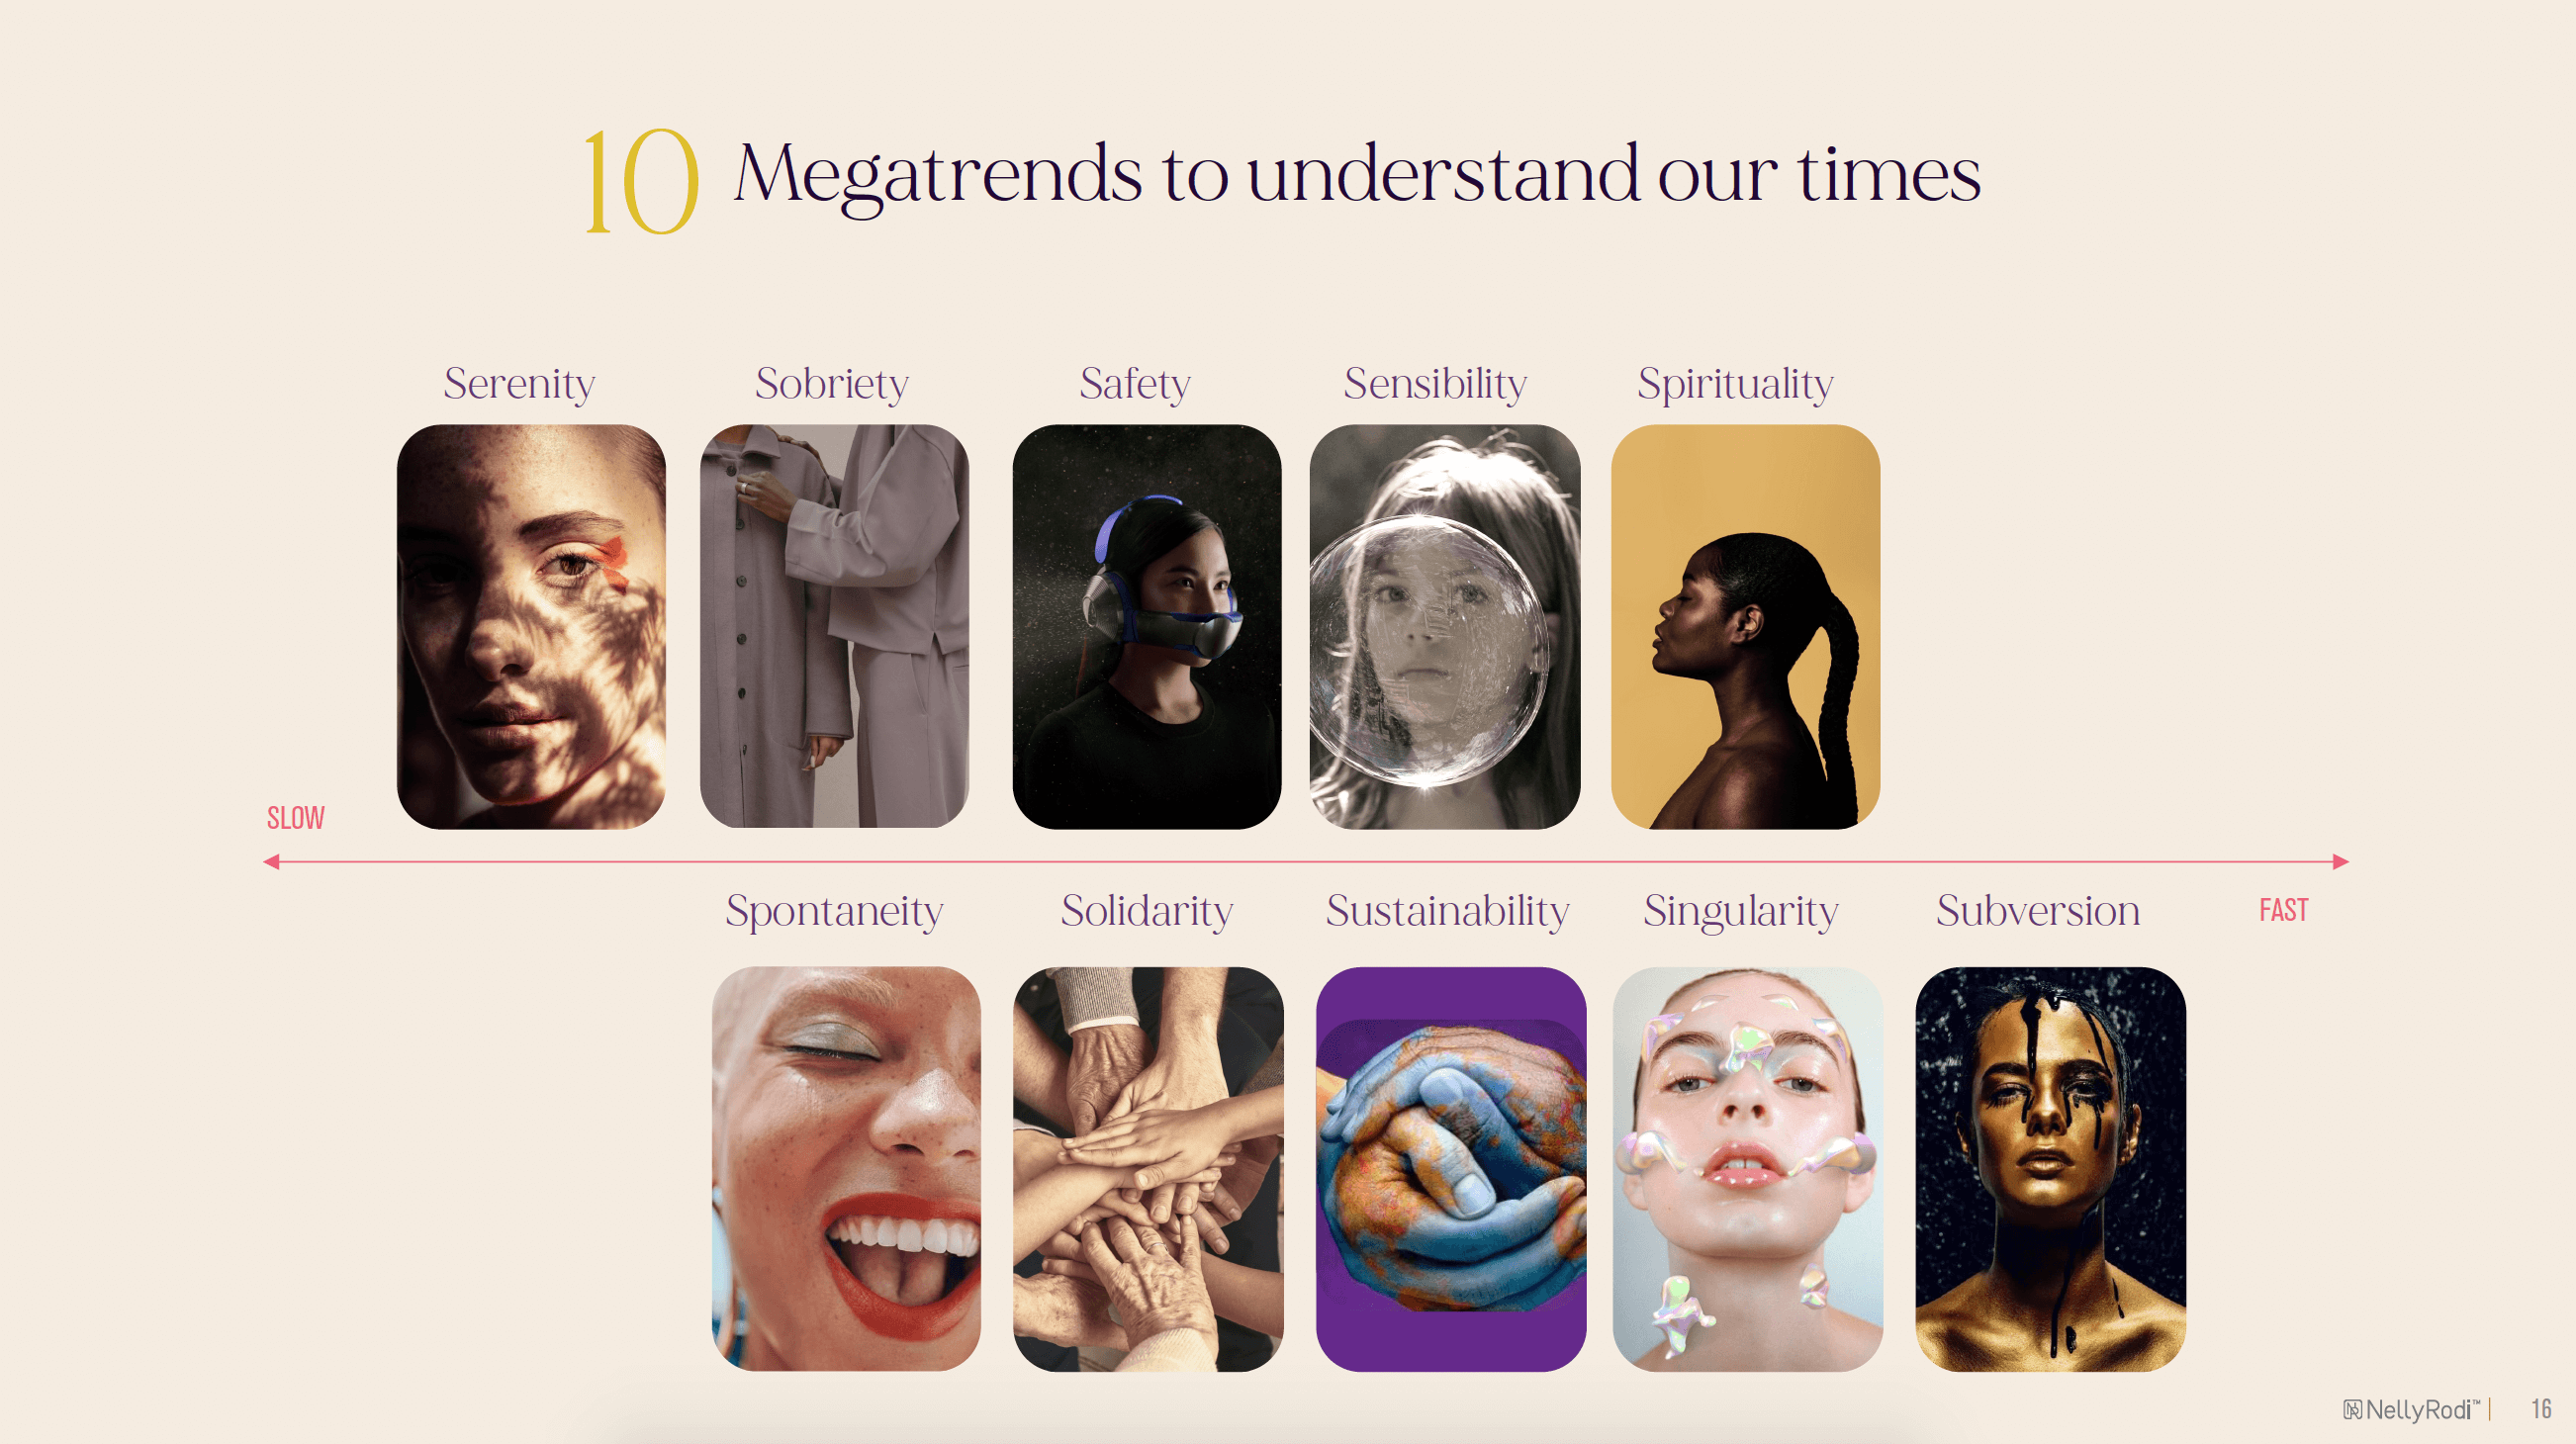 10 Megatrends Antidotes to understand the times